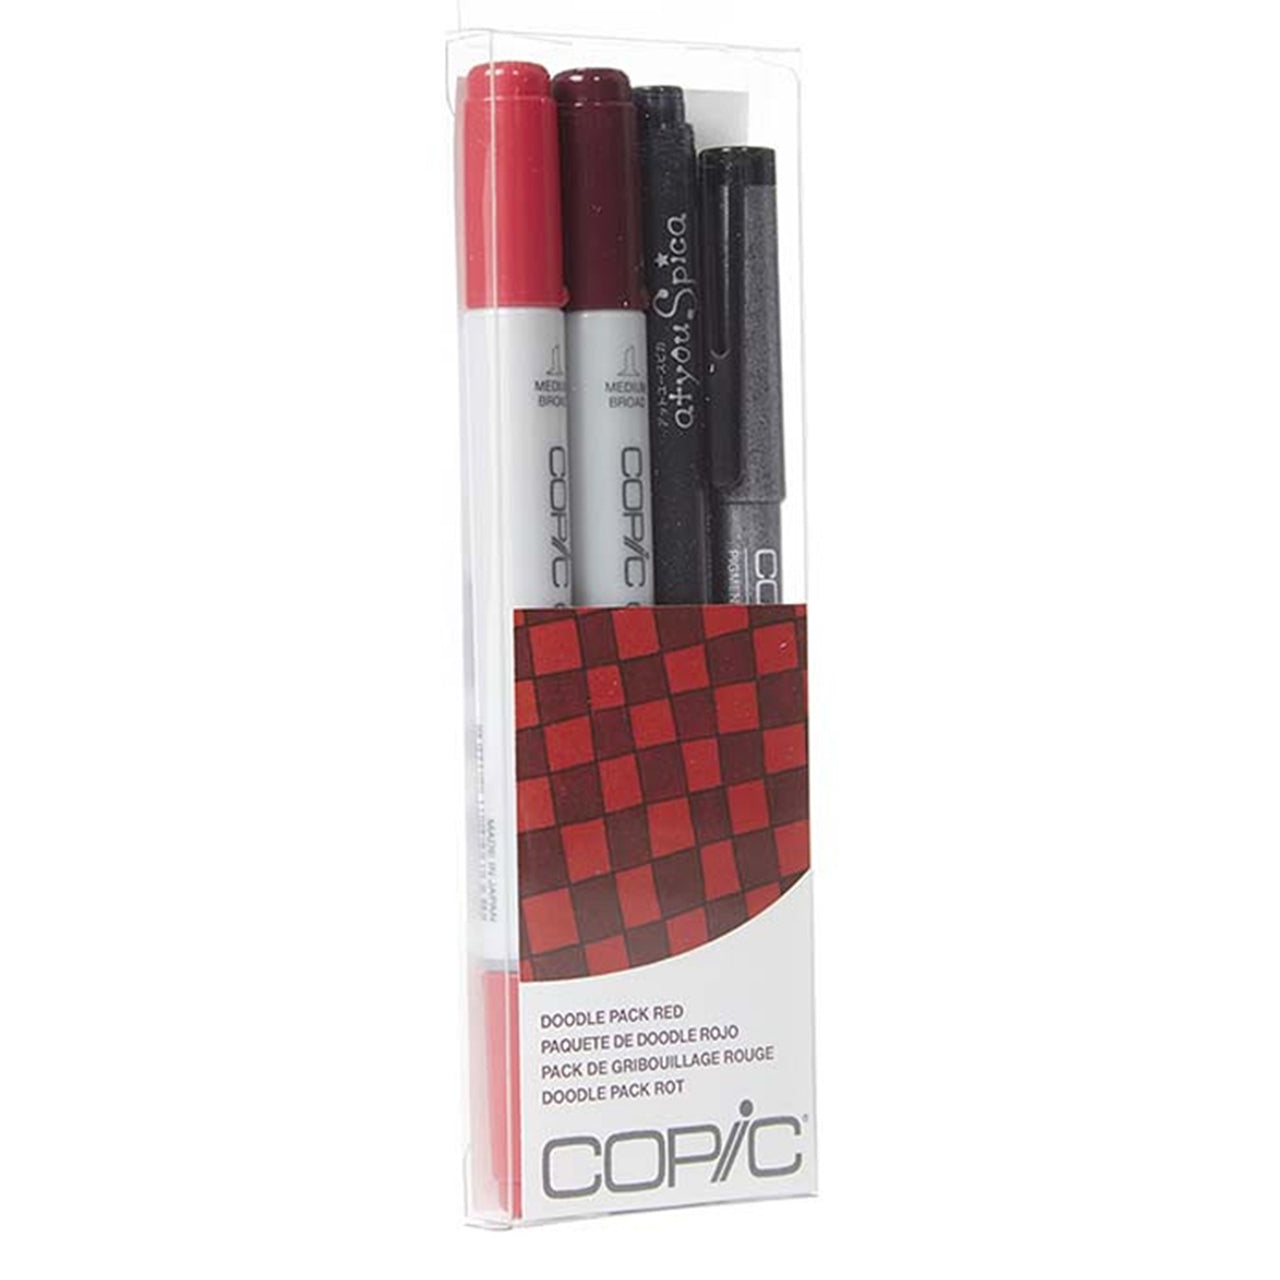 COPIC Ciao Doodle Pack Red